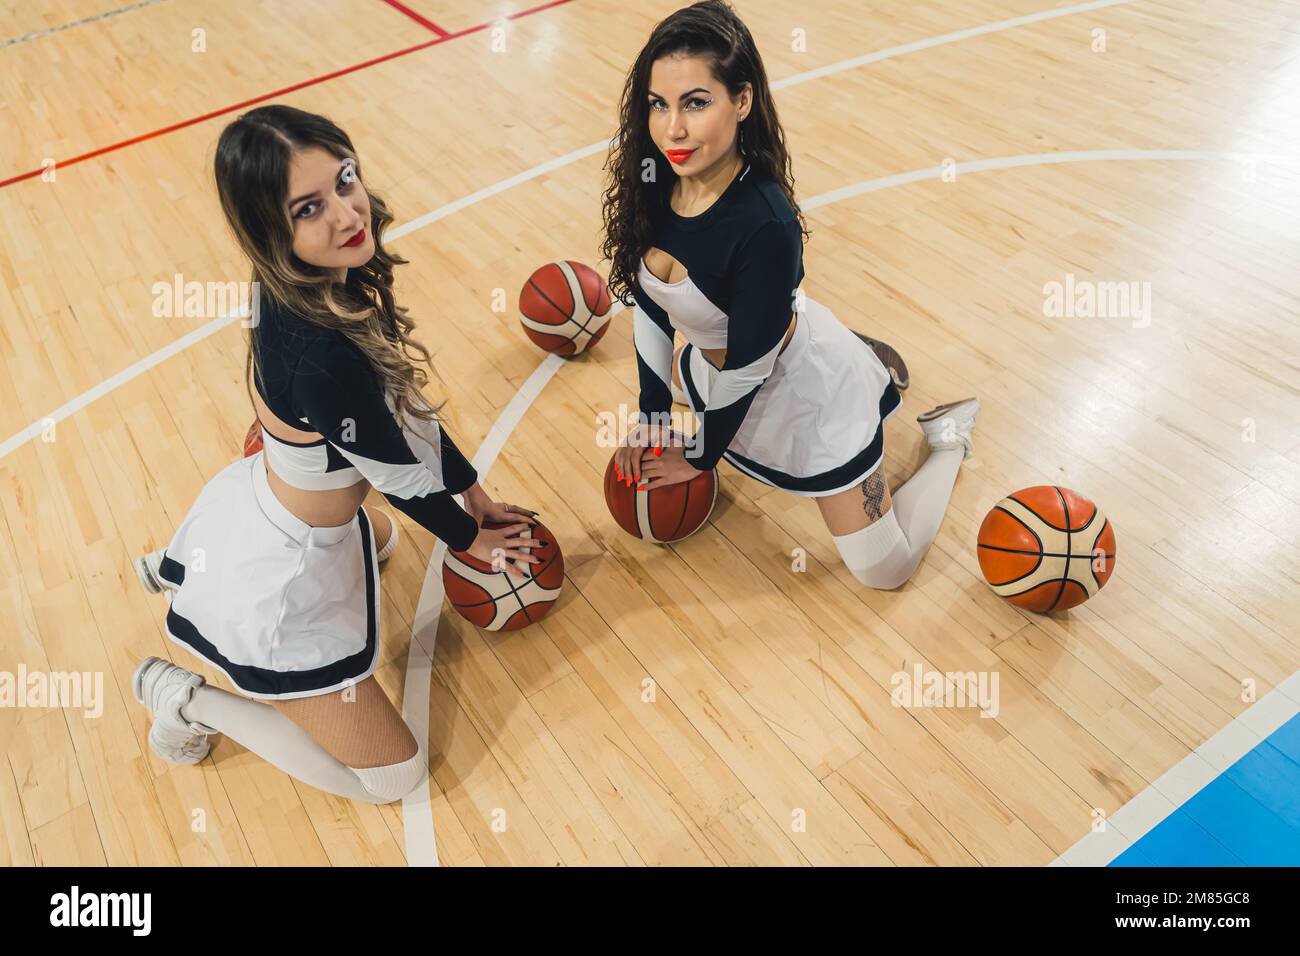 Two vibrant cheerleaders pose in front of the camera, smiling brightly as they hold basketballs on the floor. Dressed in traditional cheer uniforms, complete with mini skirts and knee-high socks. Stock Photo